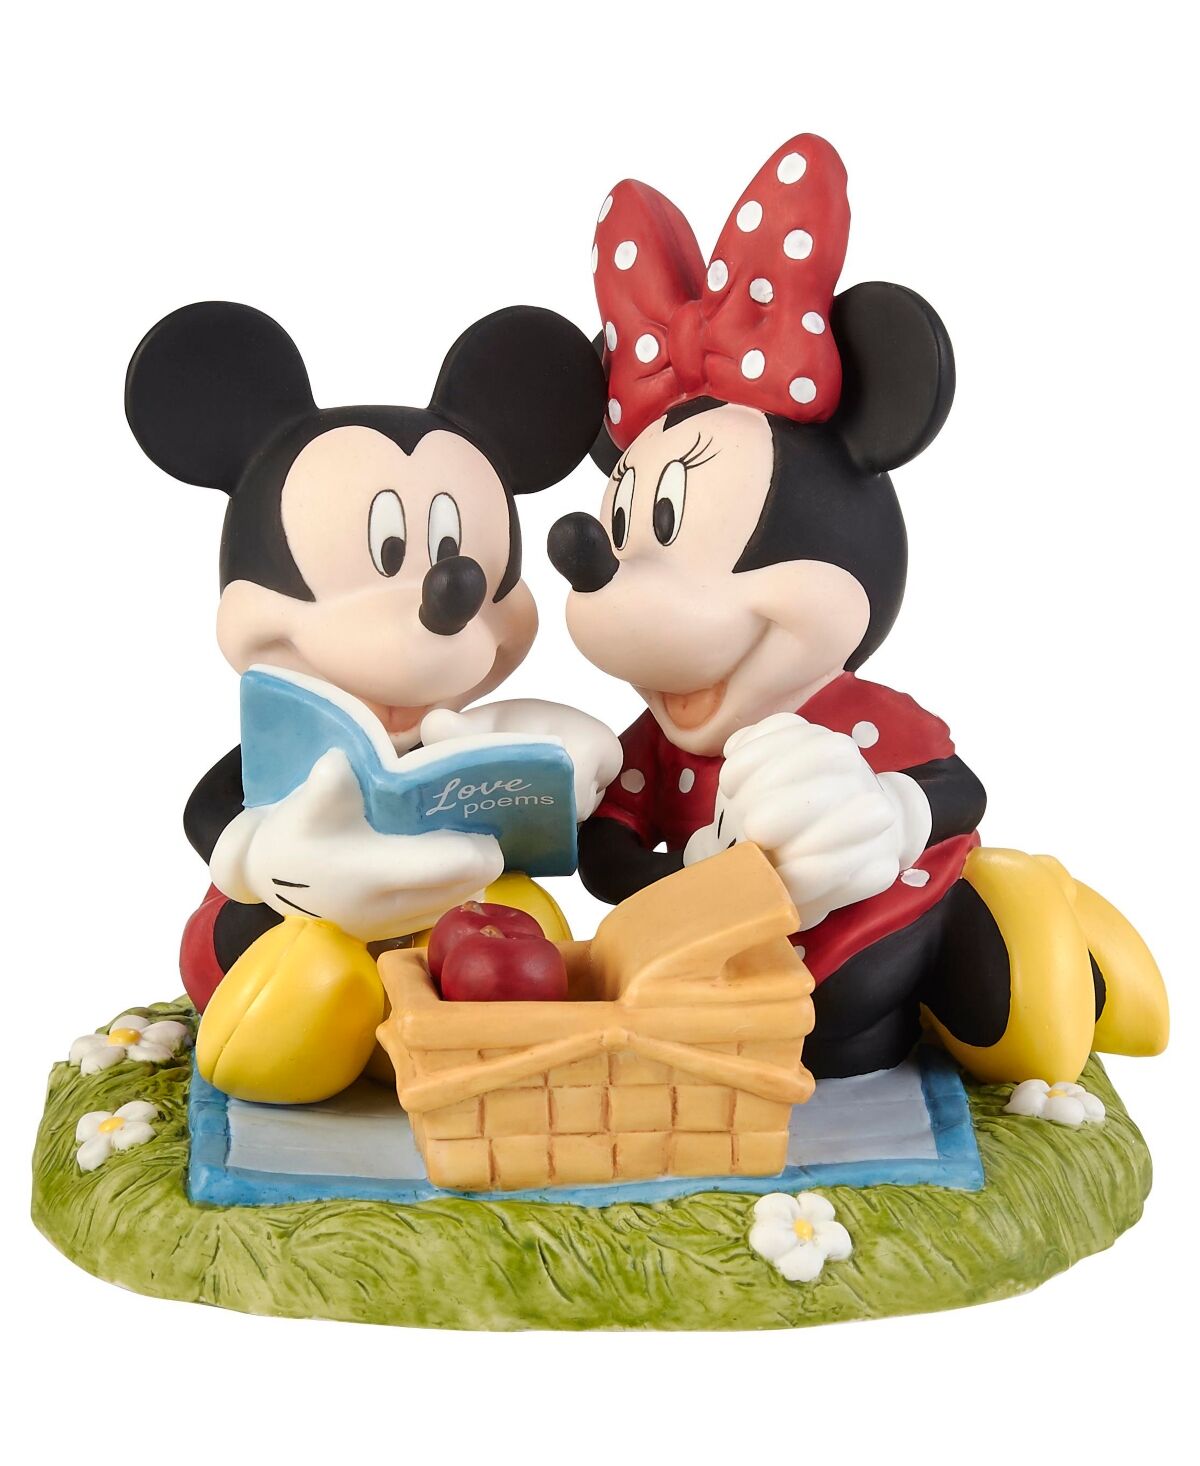 Precious Moments 221701 Disney Mickey Mouse and Minnie Mouse Life with You is Always a Picnic Bisque Porcelain Figurine - Multicolor